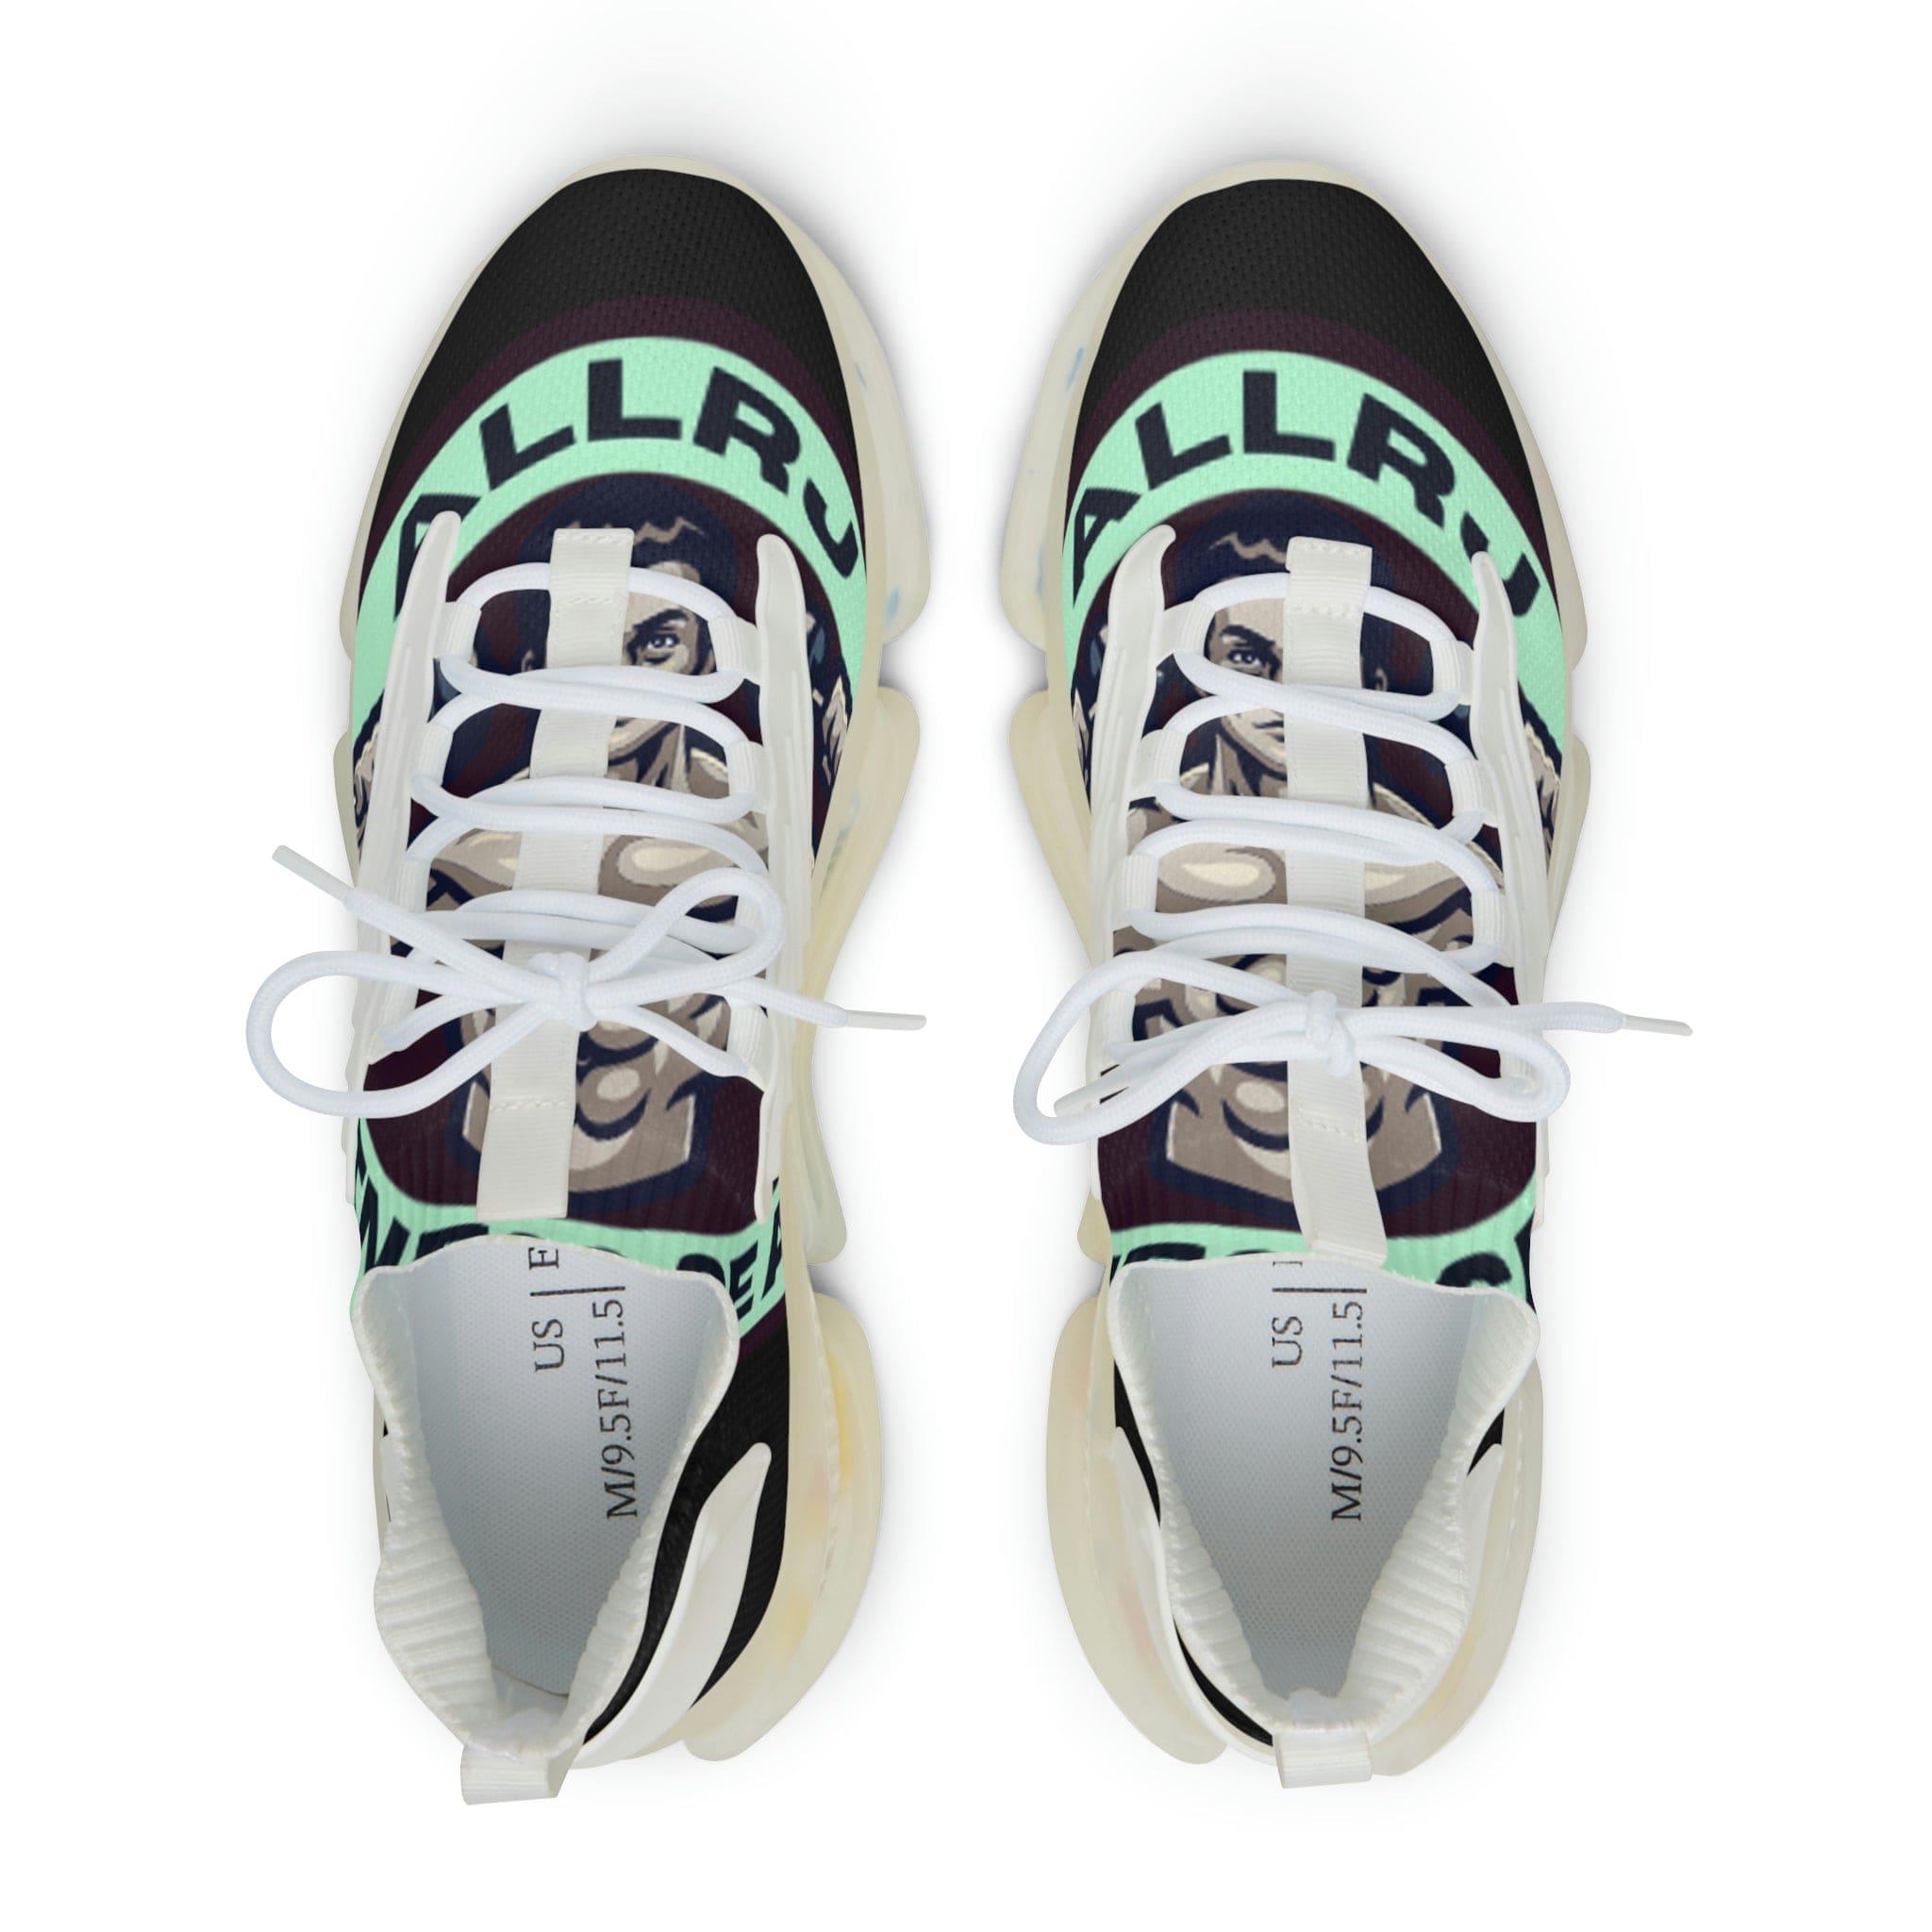 Allrj all over motif knit trainers